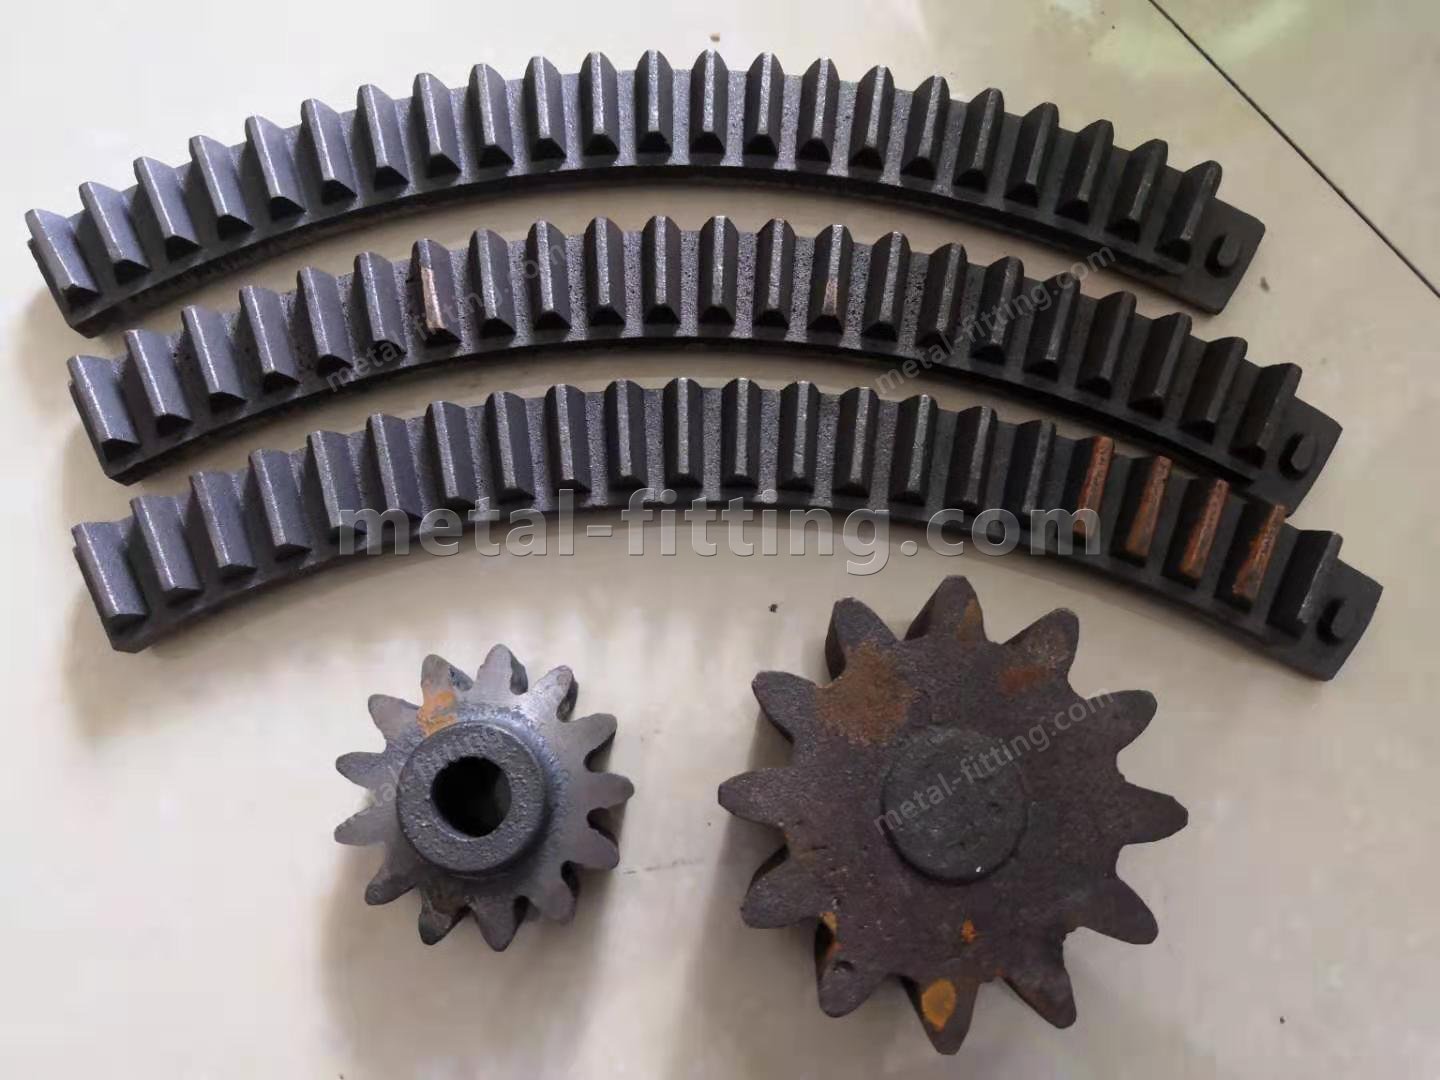 cement mixer cast iron ring gear,metal concrete mixer gear and pinion